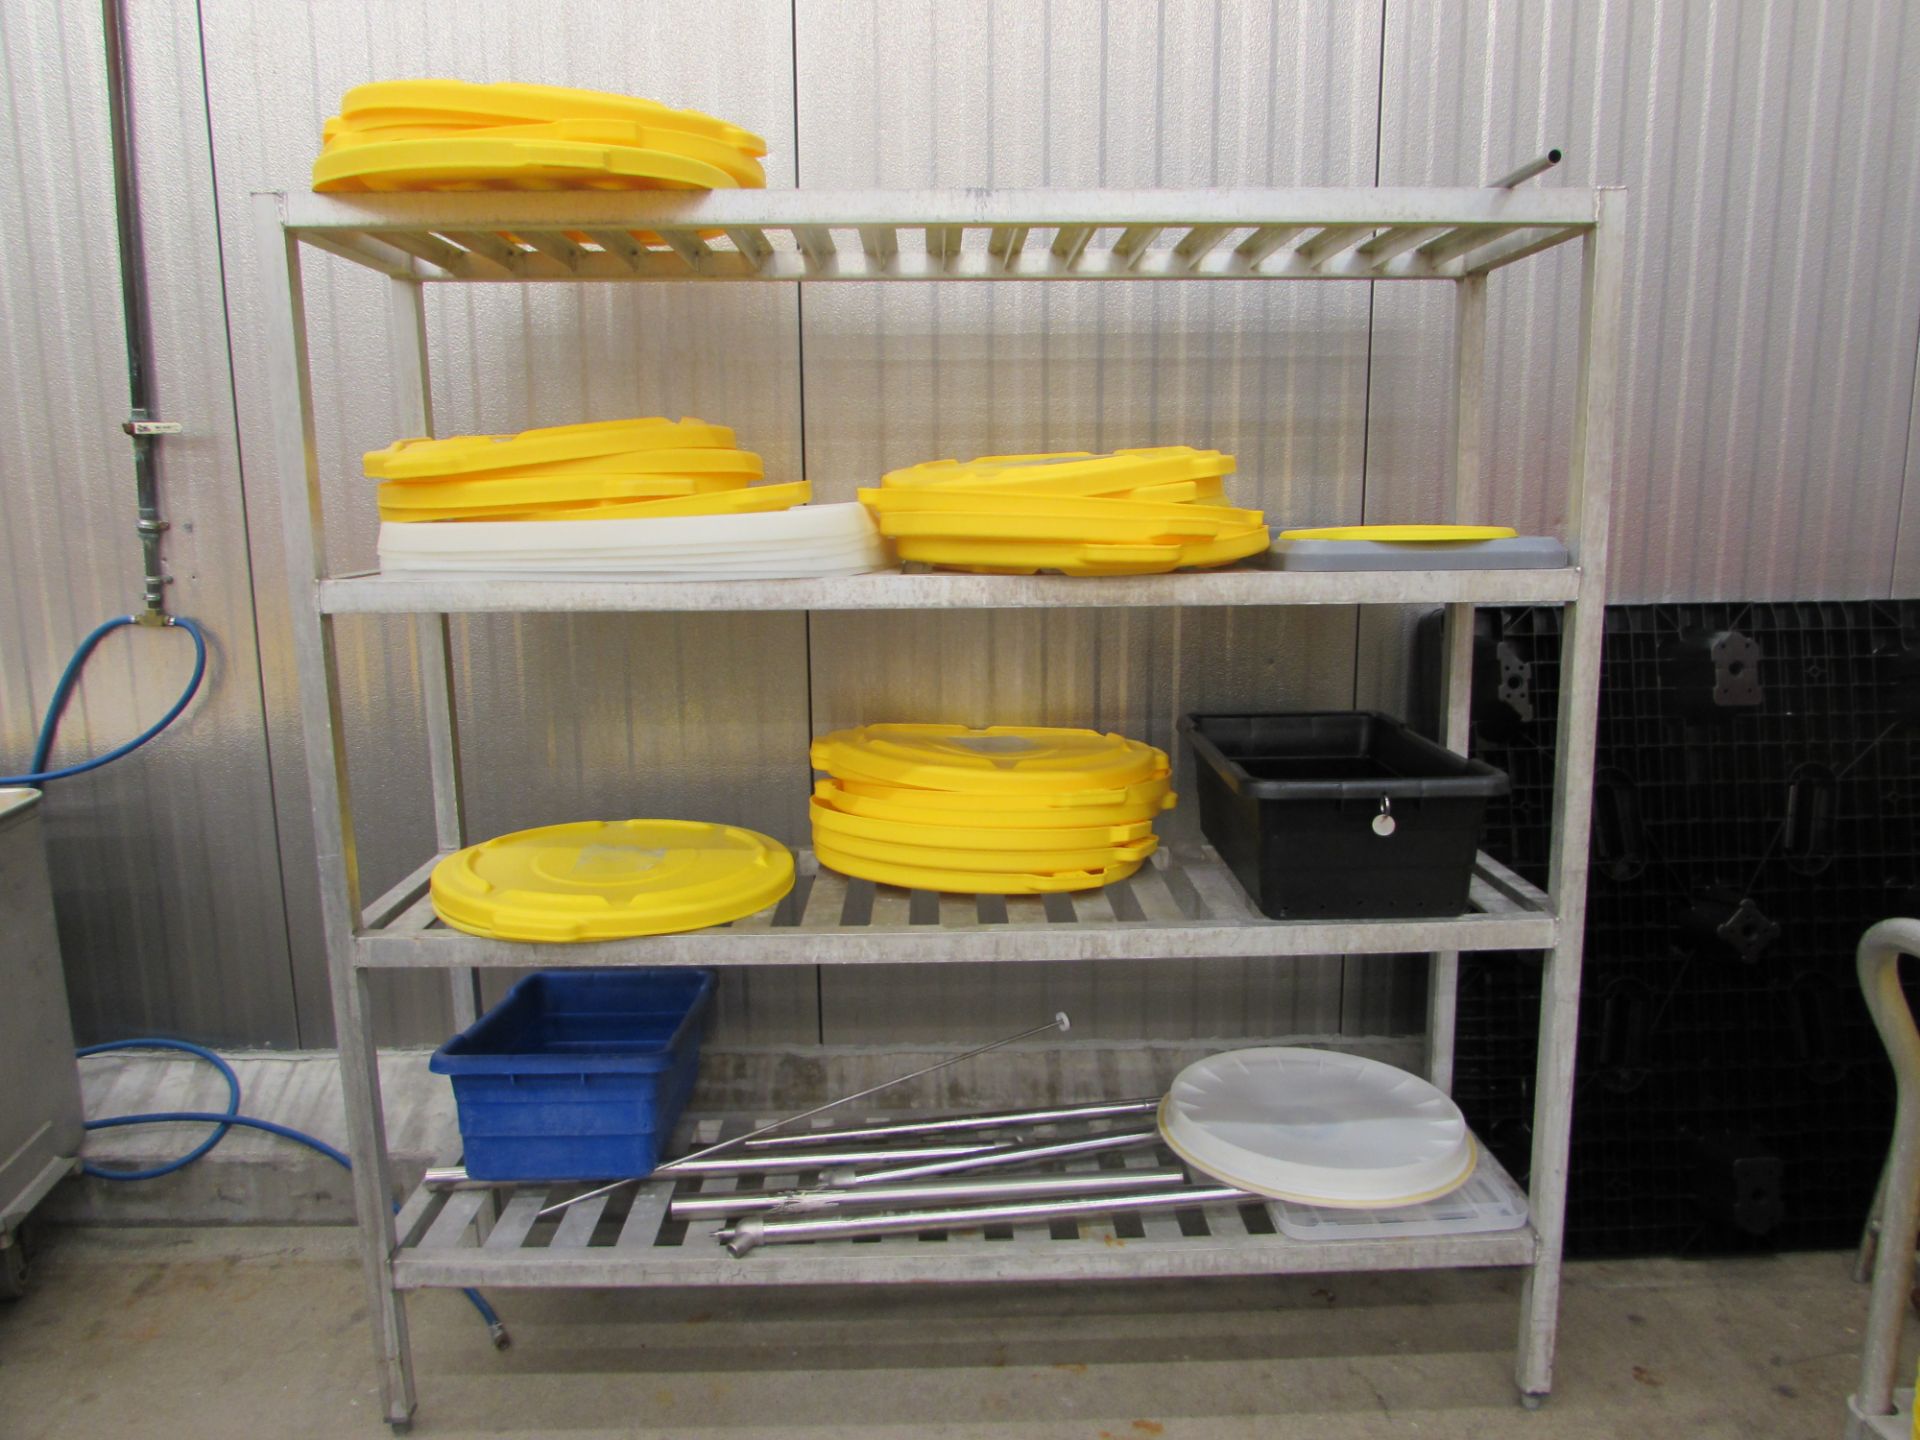 Rubbermaid Brute 32 Gallon Food Handling Containers & Lids, Yellow, - Image 6 of 7